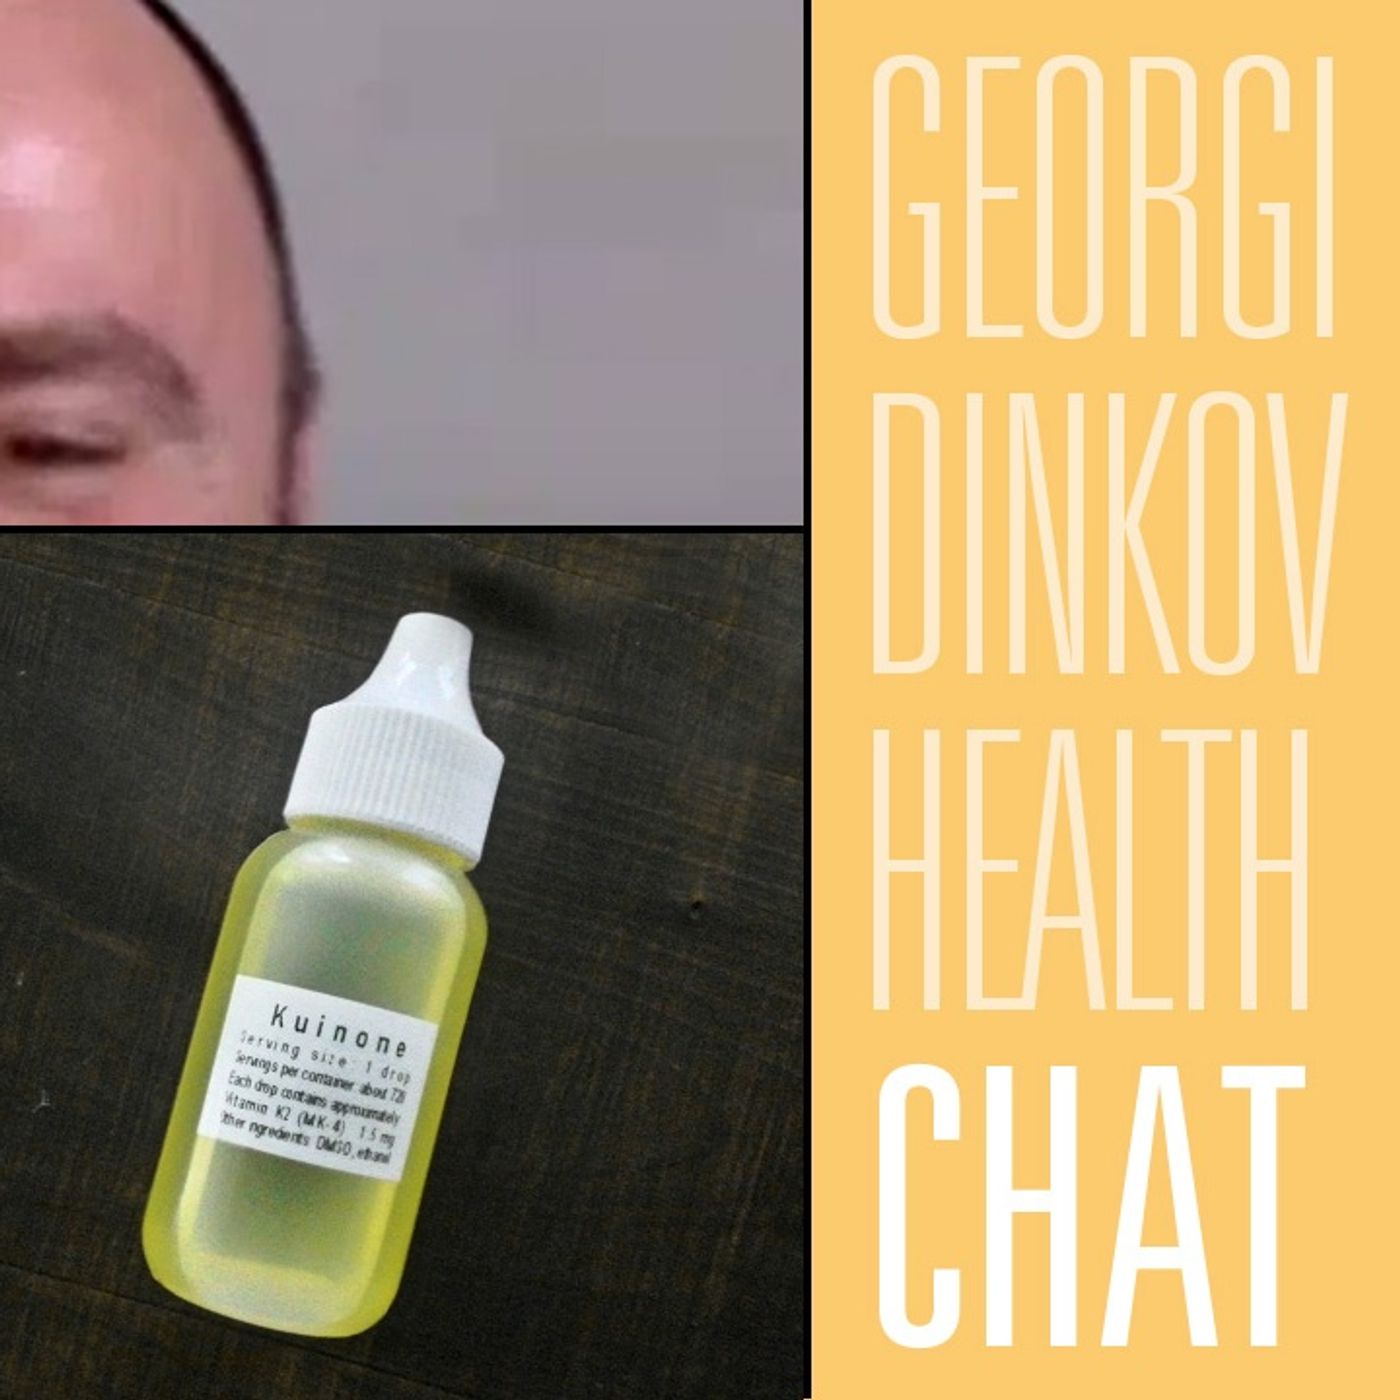 Talking Testosterone, Androgens, Cortisol and More With Georgi Dinkov | Fireside Chat 187